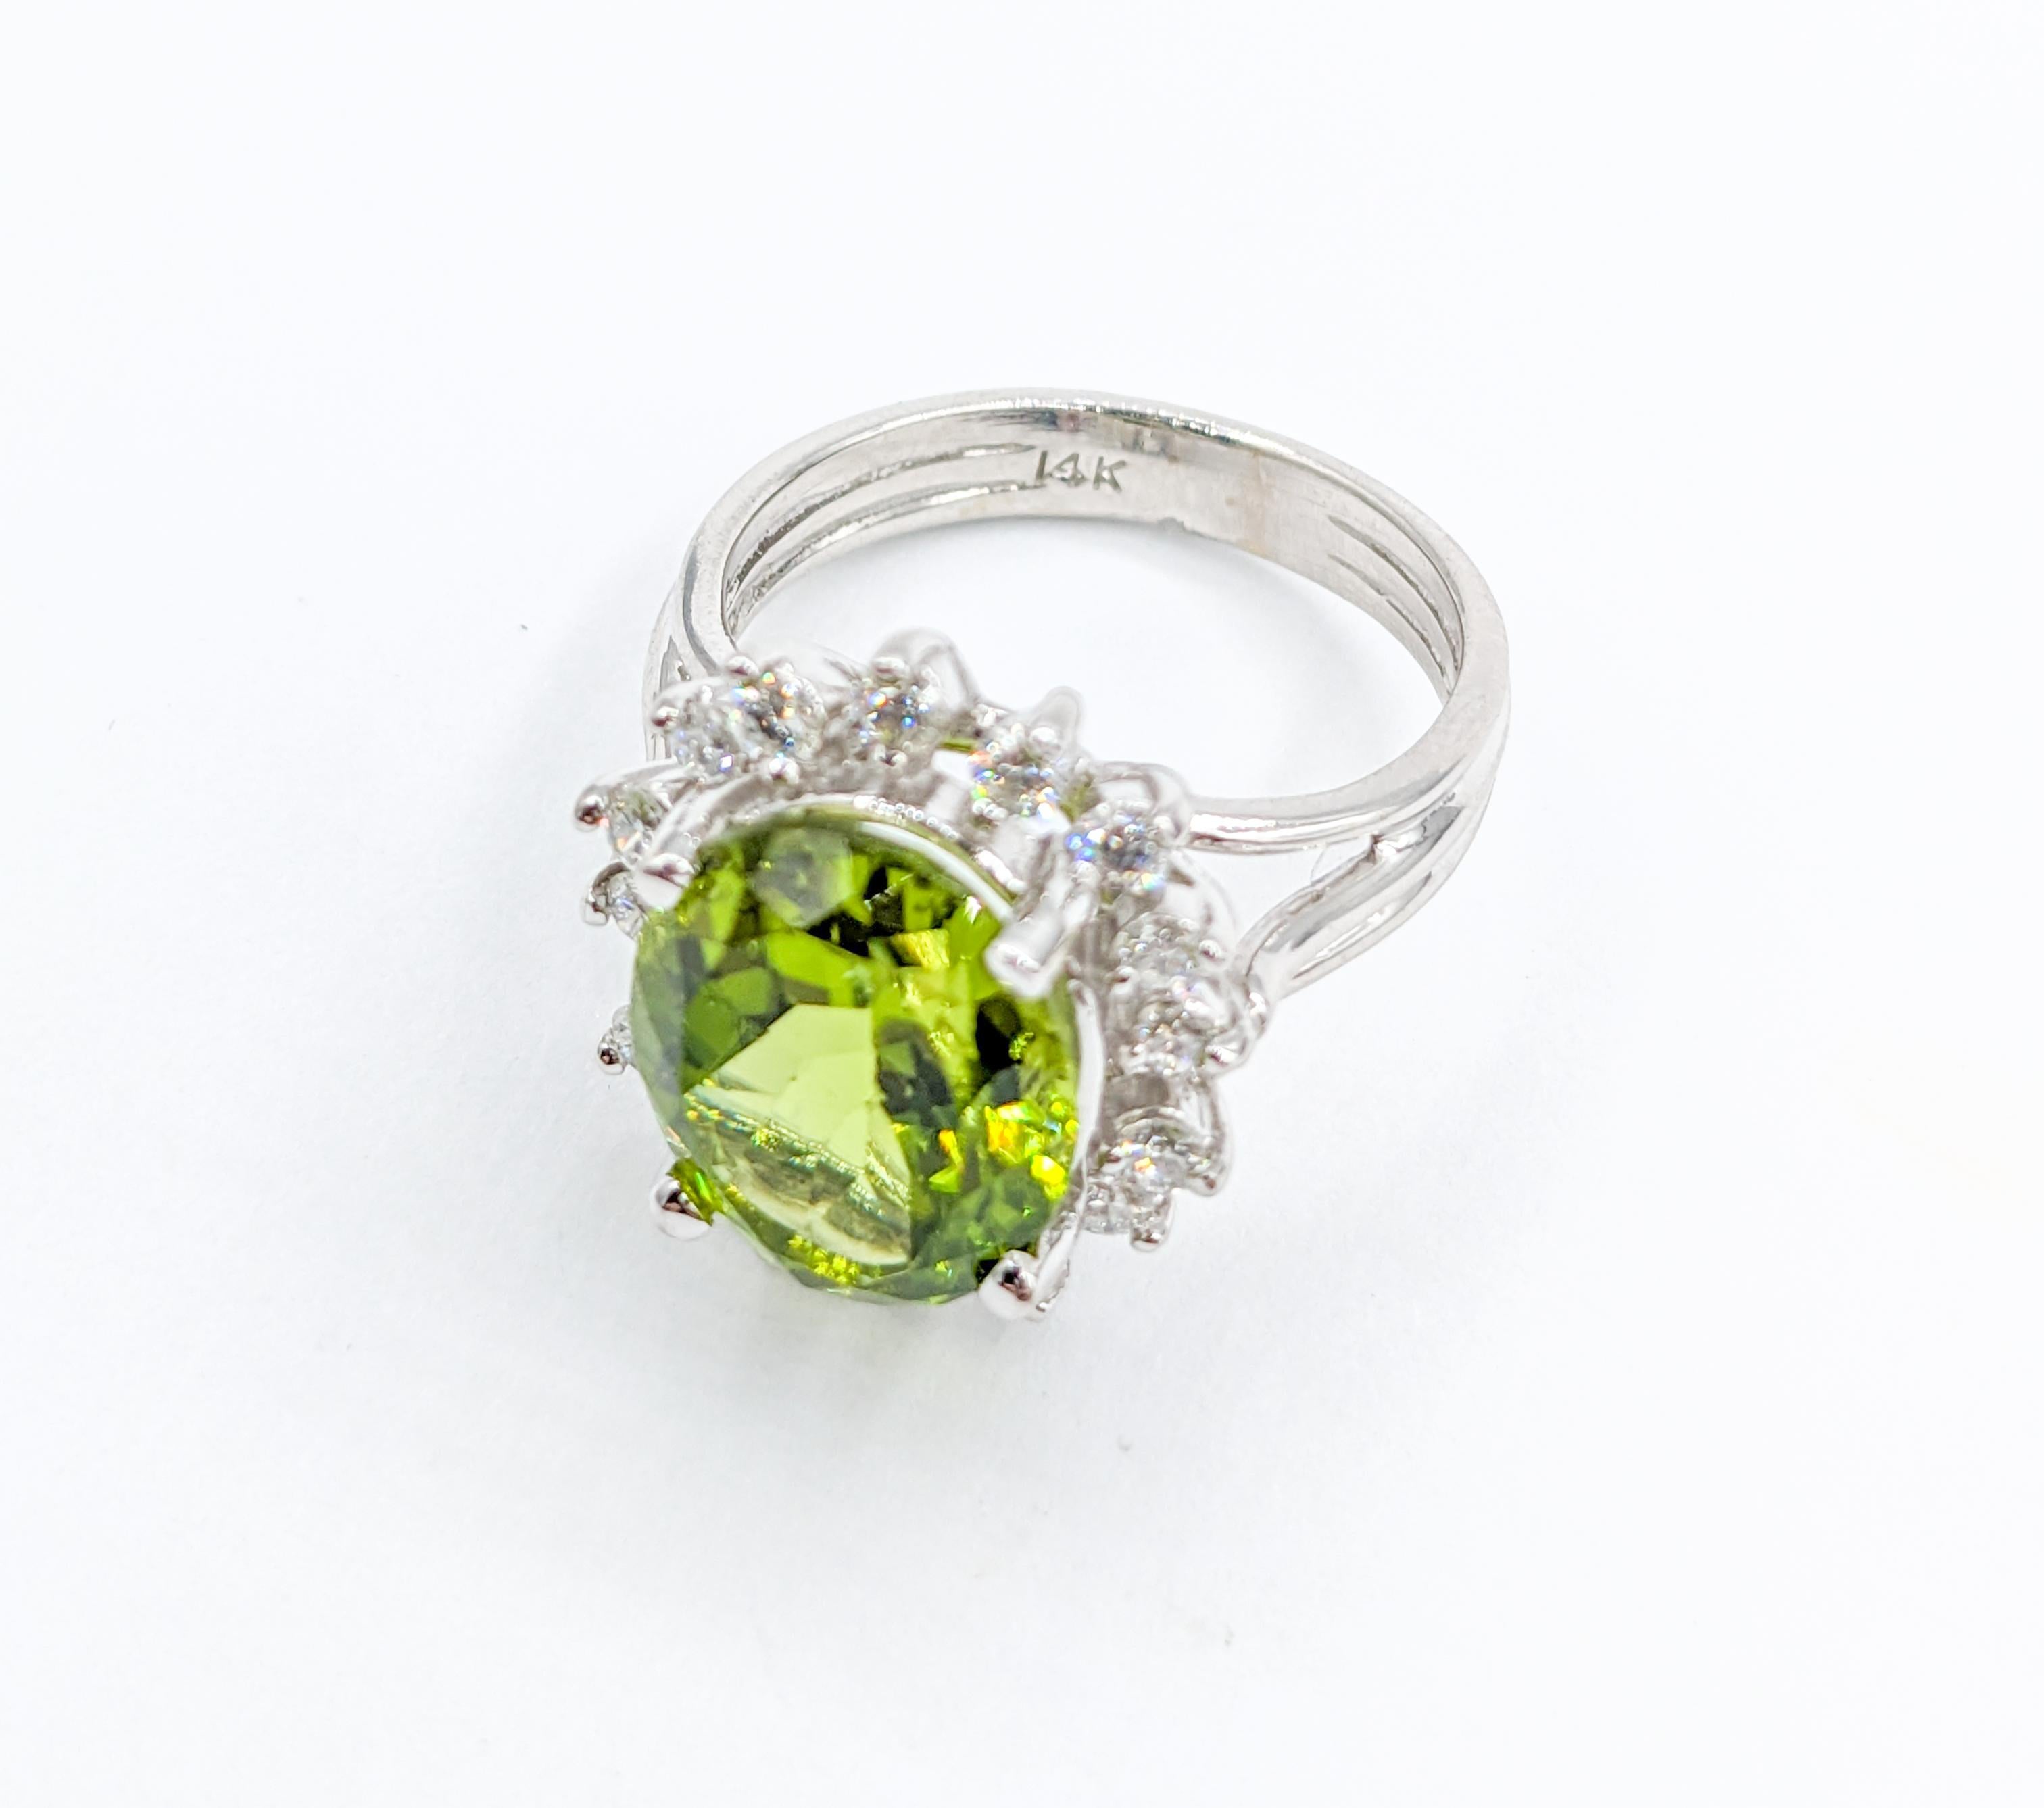 5ct Peridot & Diamond Halo Cocktail Ring For Sale 2